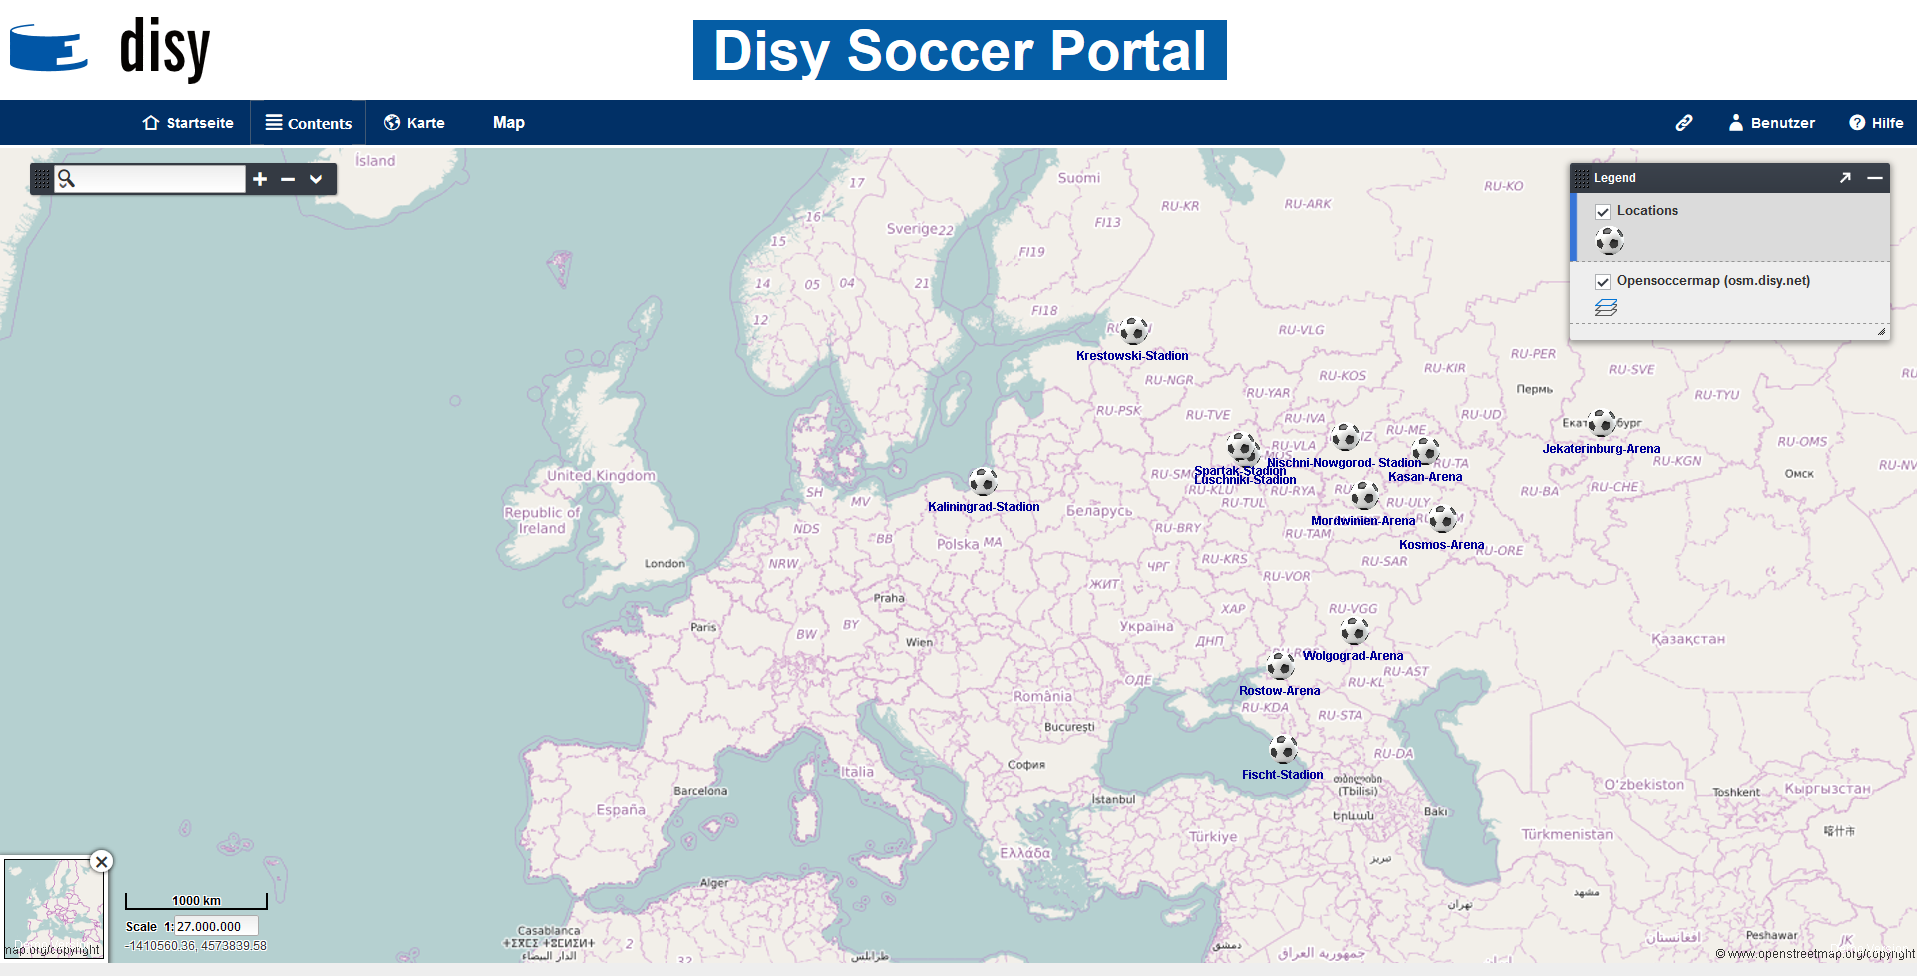 Football world cup games in Disy Sports Portal